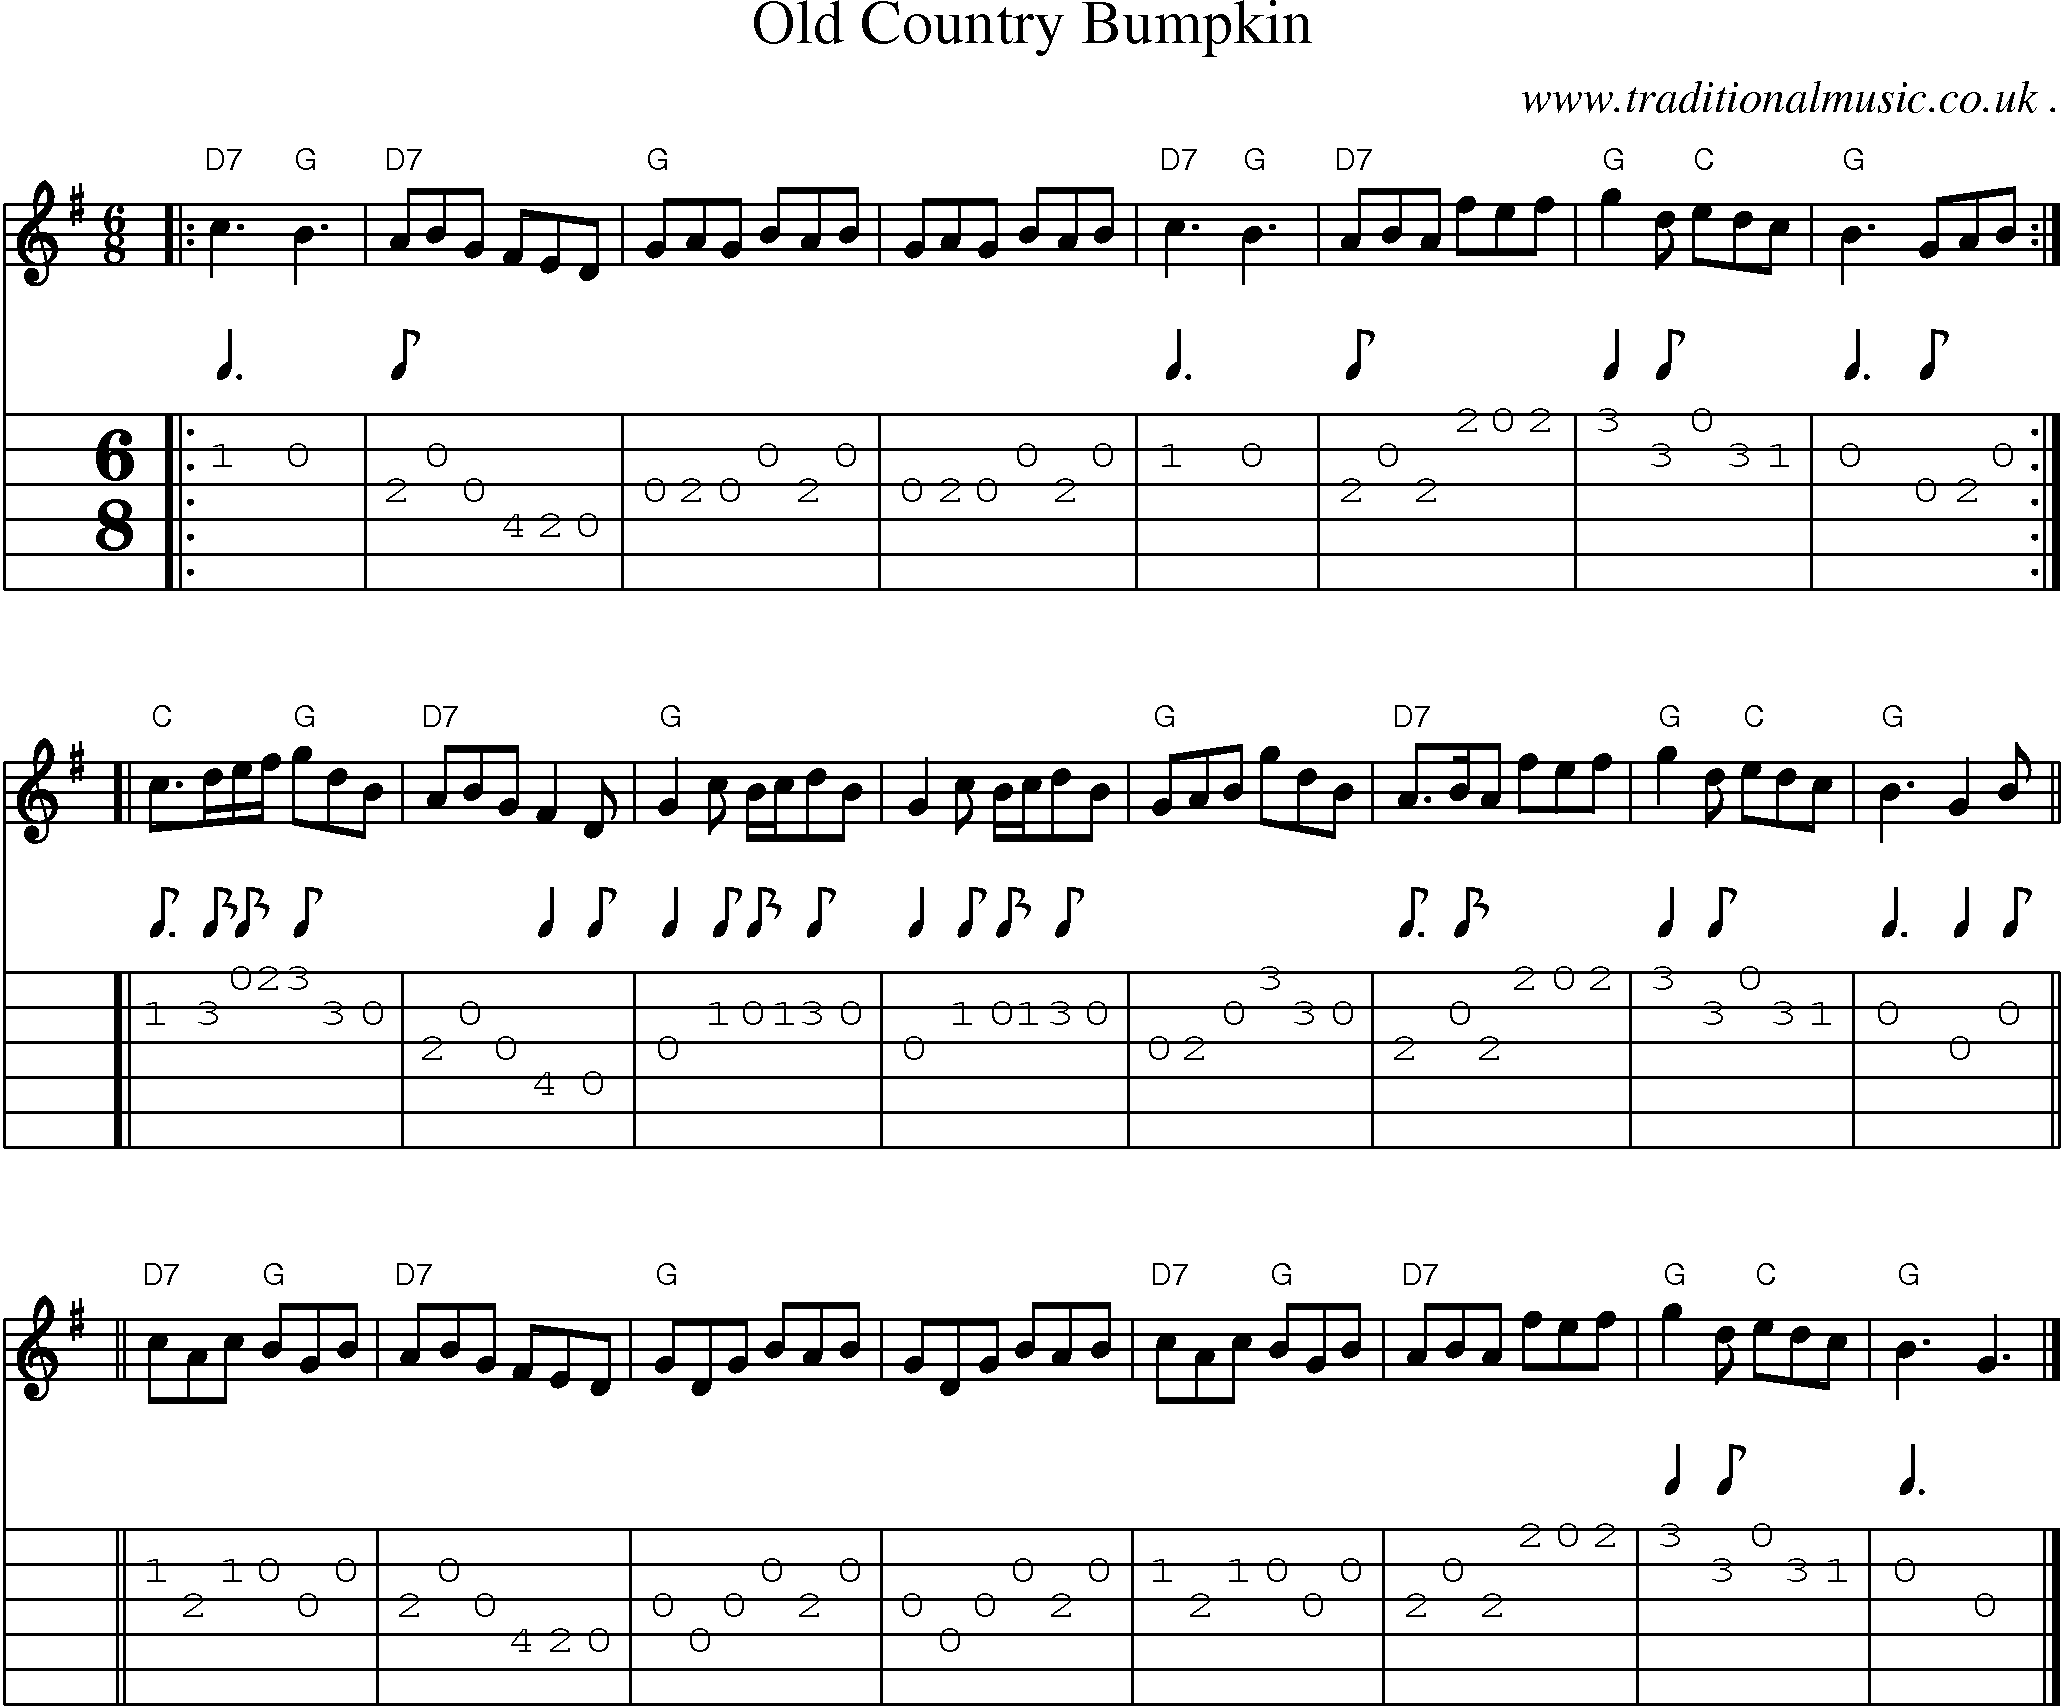 Sheet-music  score, Chords and Guitar Tabs for Old Country Bumpkin